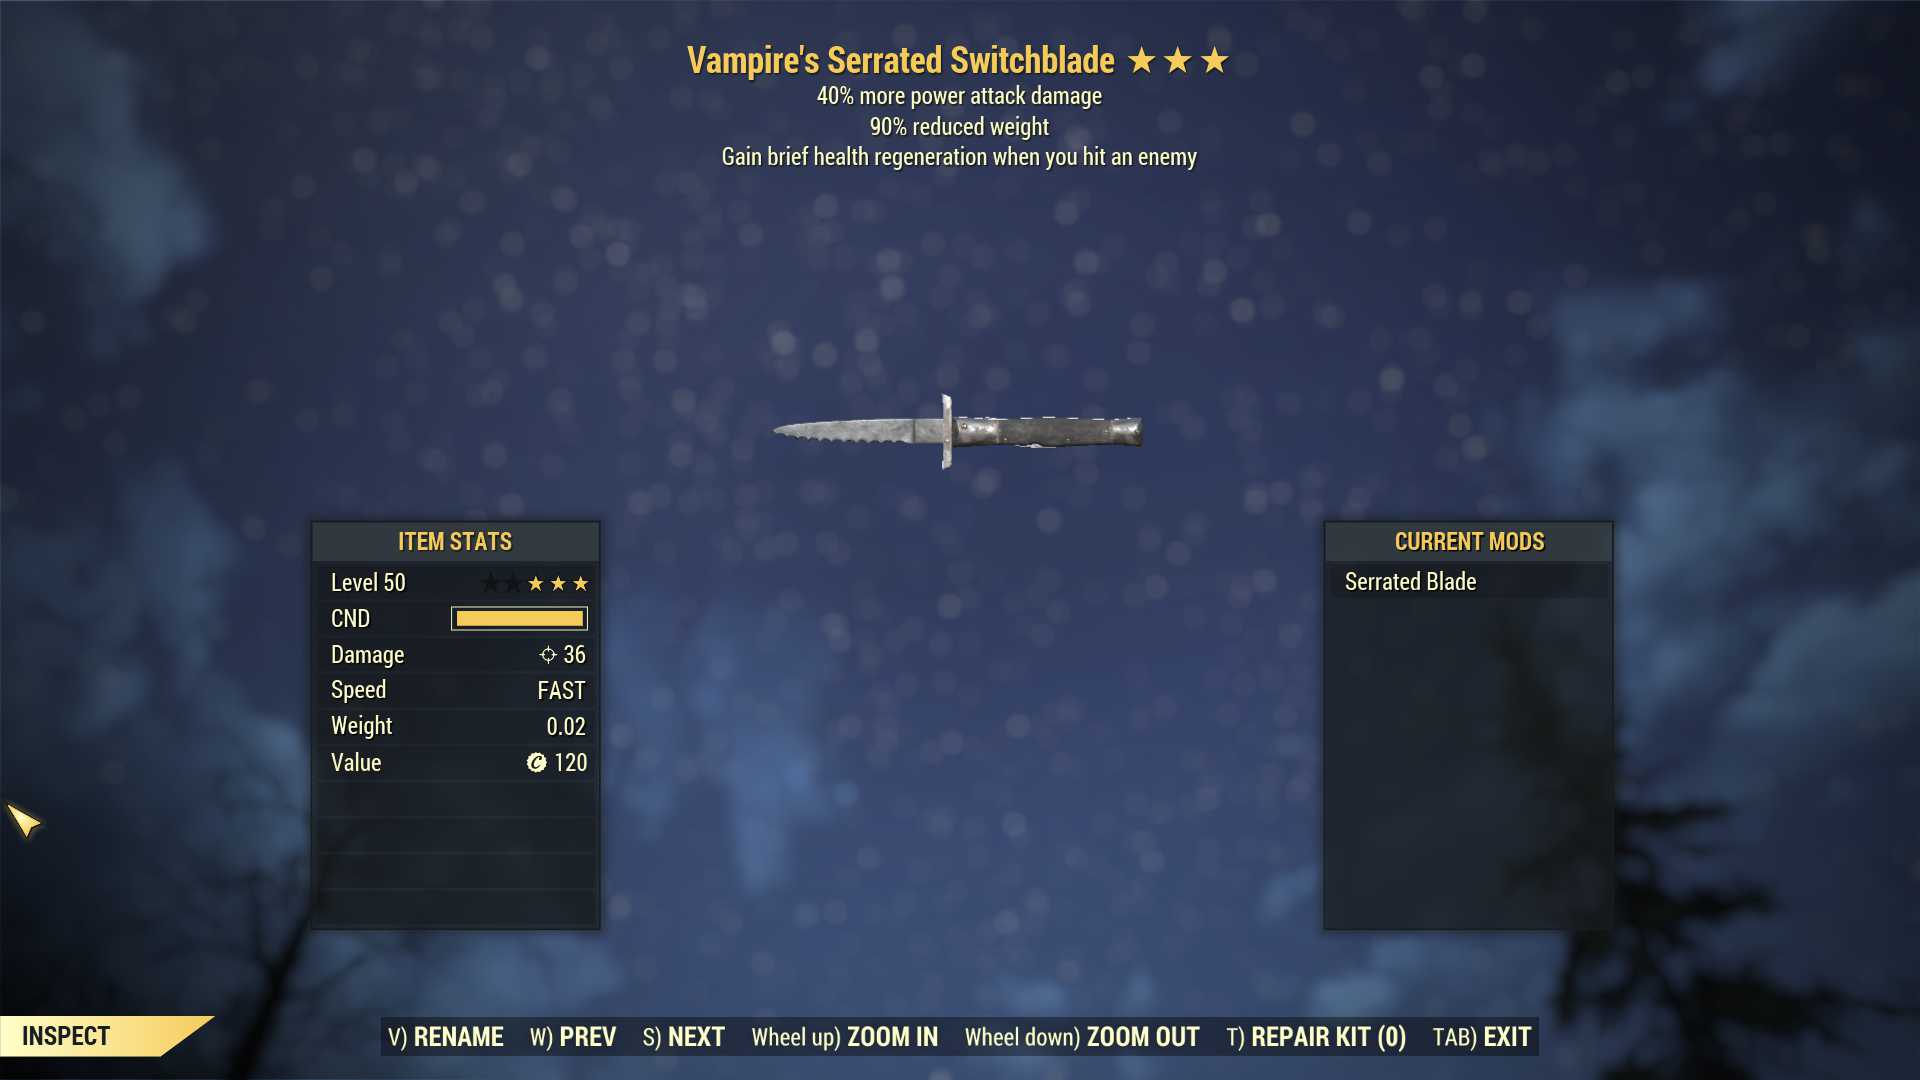 Vampire's Switchblade (+40% damage PA, 90% reduced weight)